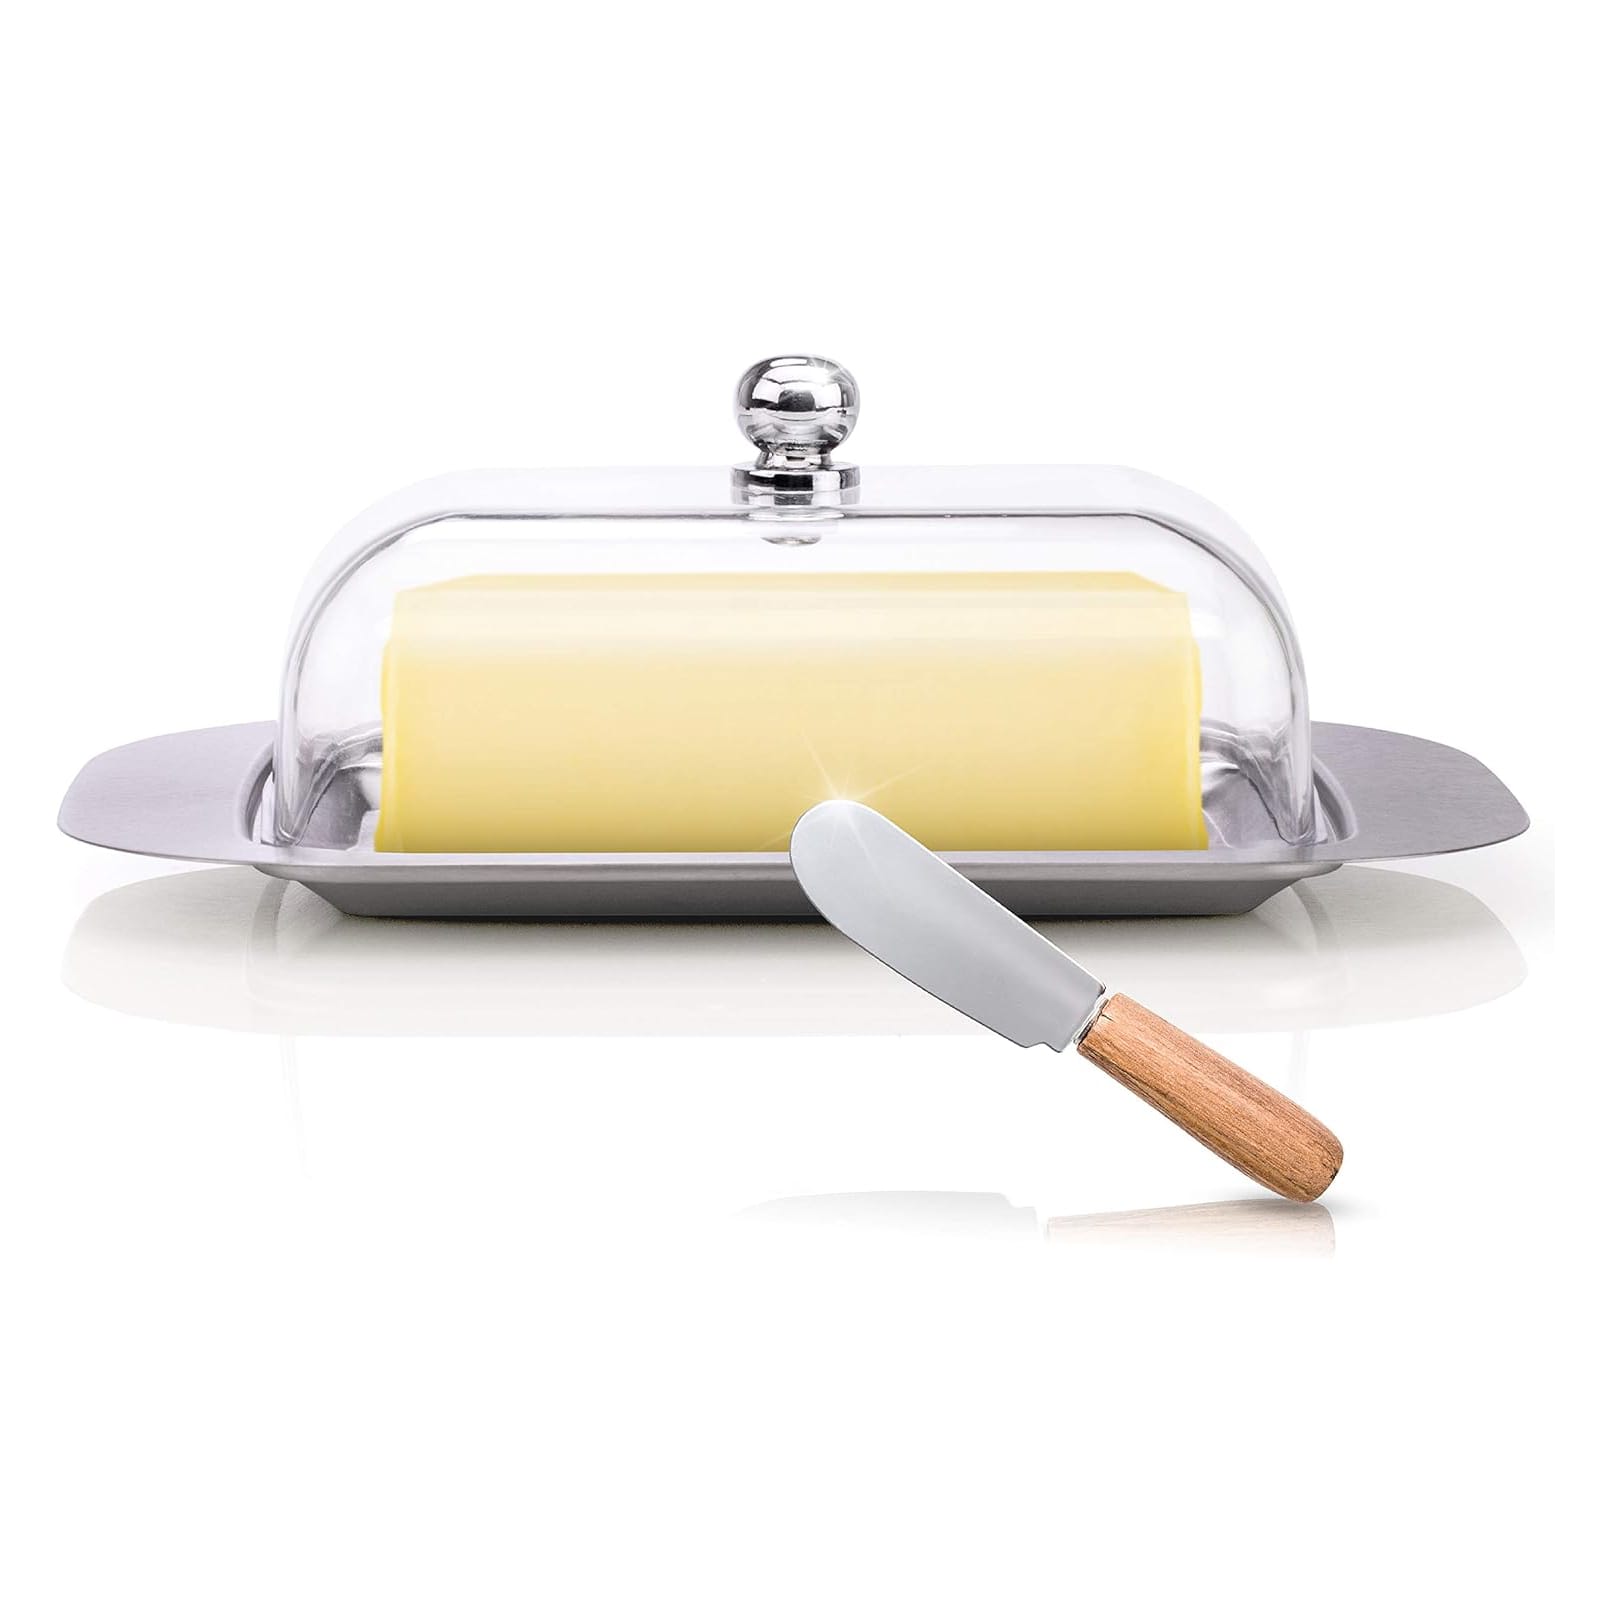 https://cdn.apartmenttherapy.info/image/upload/v1698338426/gen-workflow/product-database/all-green-stainless-steel-butter-dish-amazon.jpg